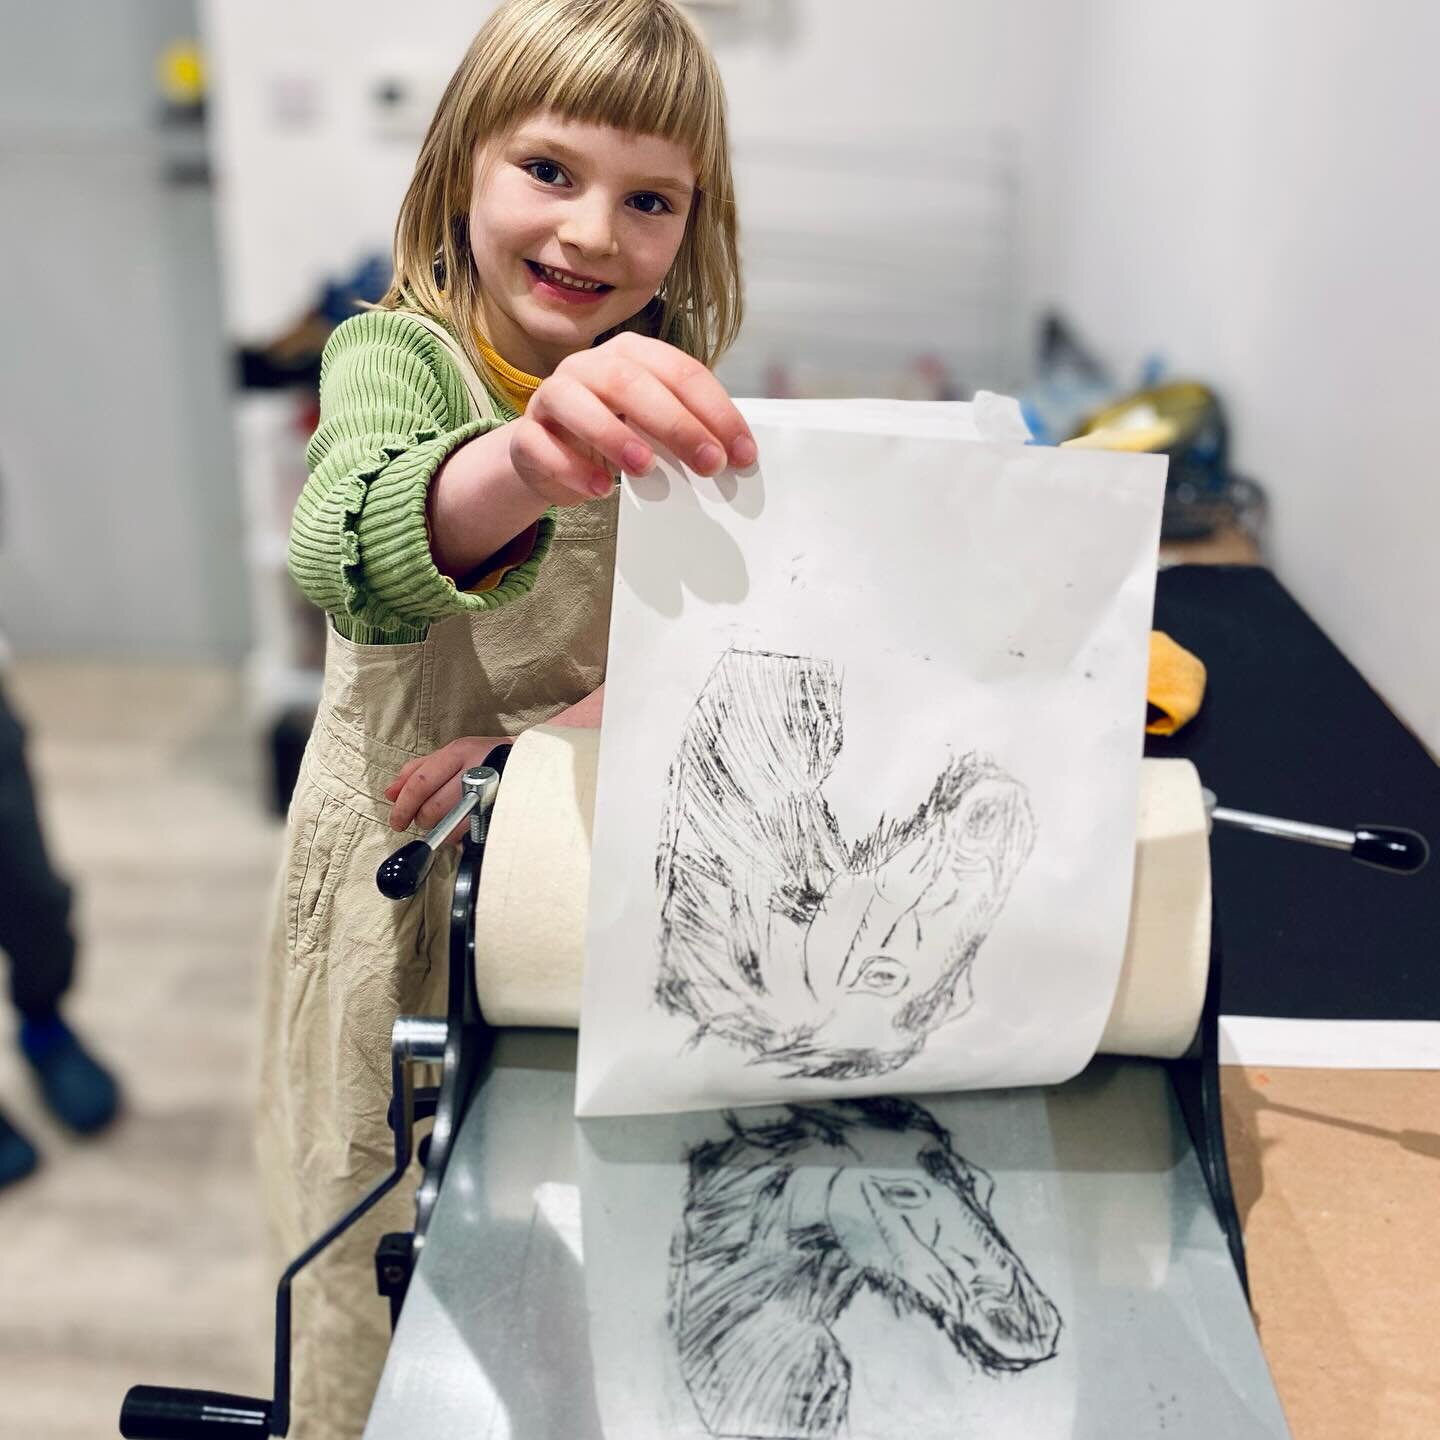 Animal Portraits - drypoint printing 😃

Focusing on the printing process this week, students were introduced to drypoint printing - an intaglio printmaking method that involves scratching an image into a plate with a pointed tool. 

Continuing with 